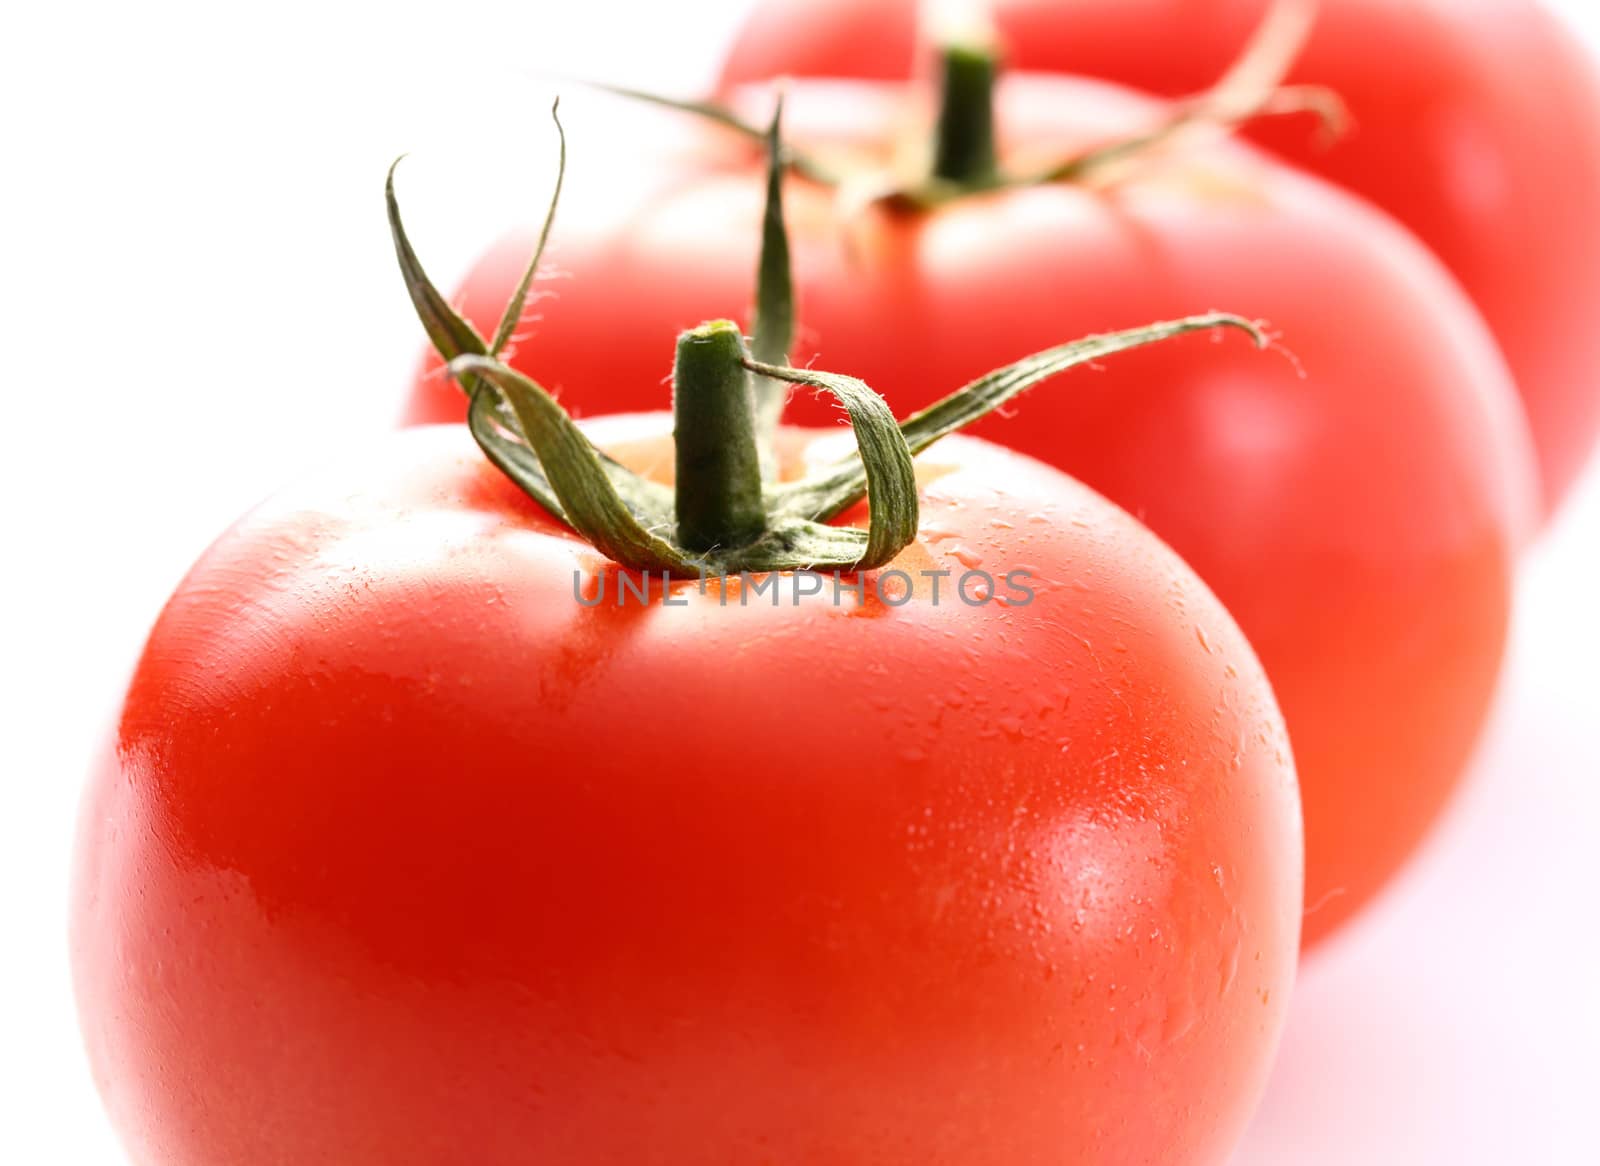 Tomatoes on the white background